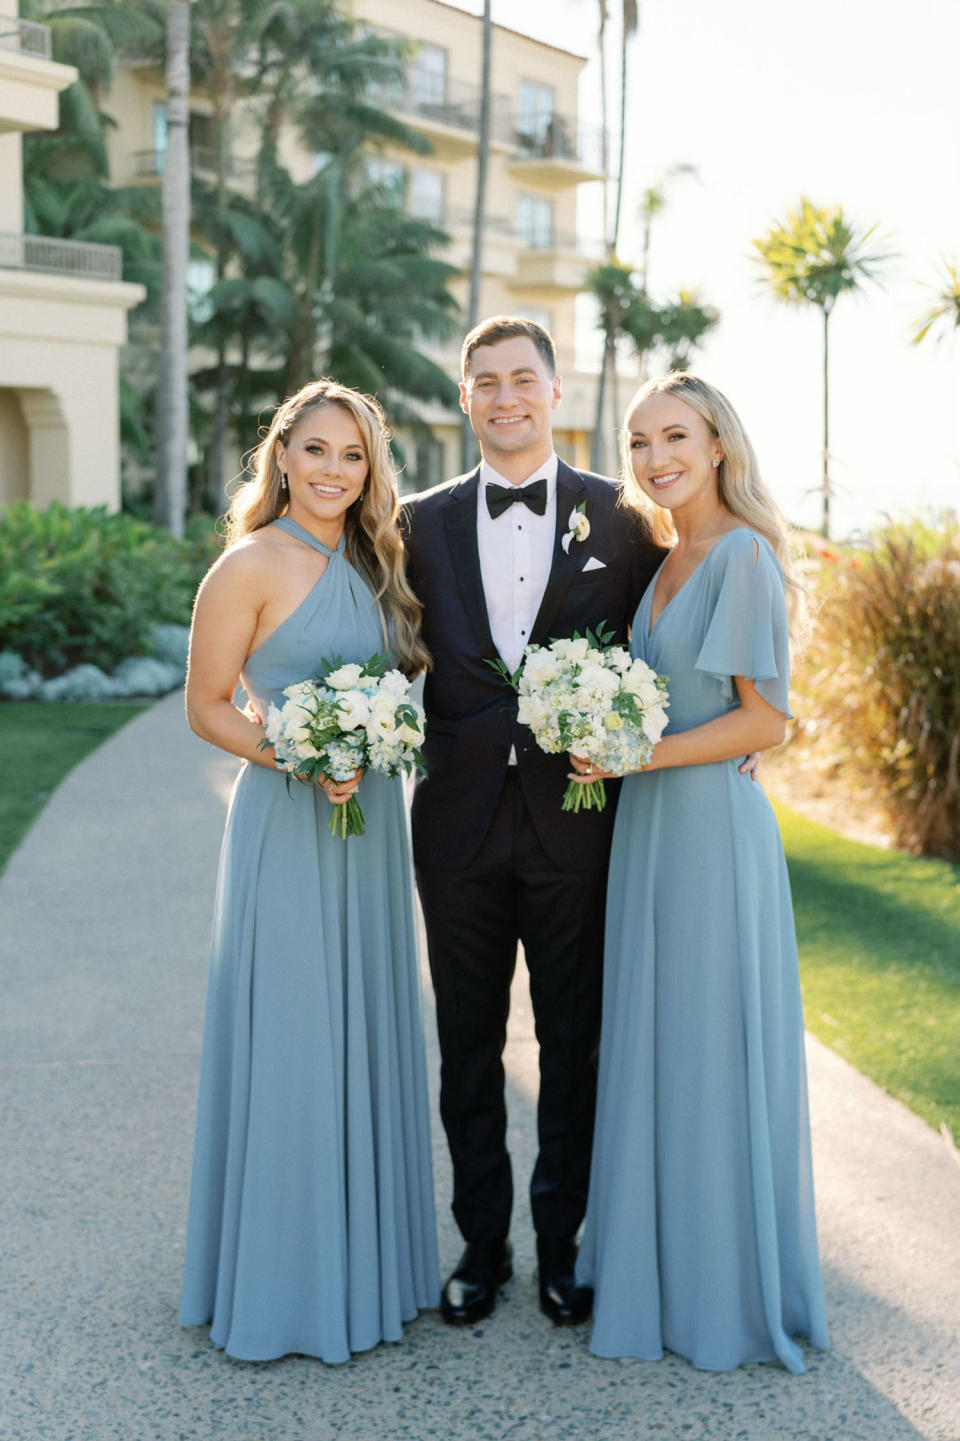 Brother dances with 2 sisters at wedding after mom died (Courtesy Kristina Adams)